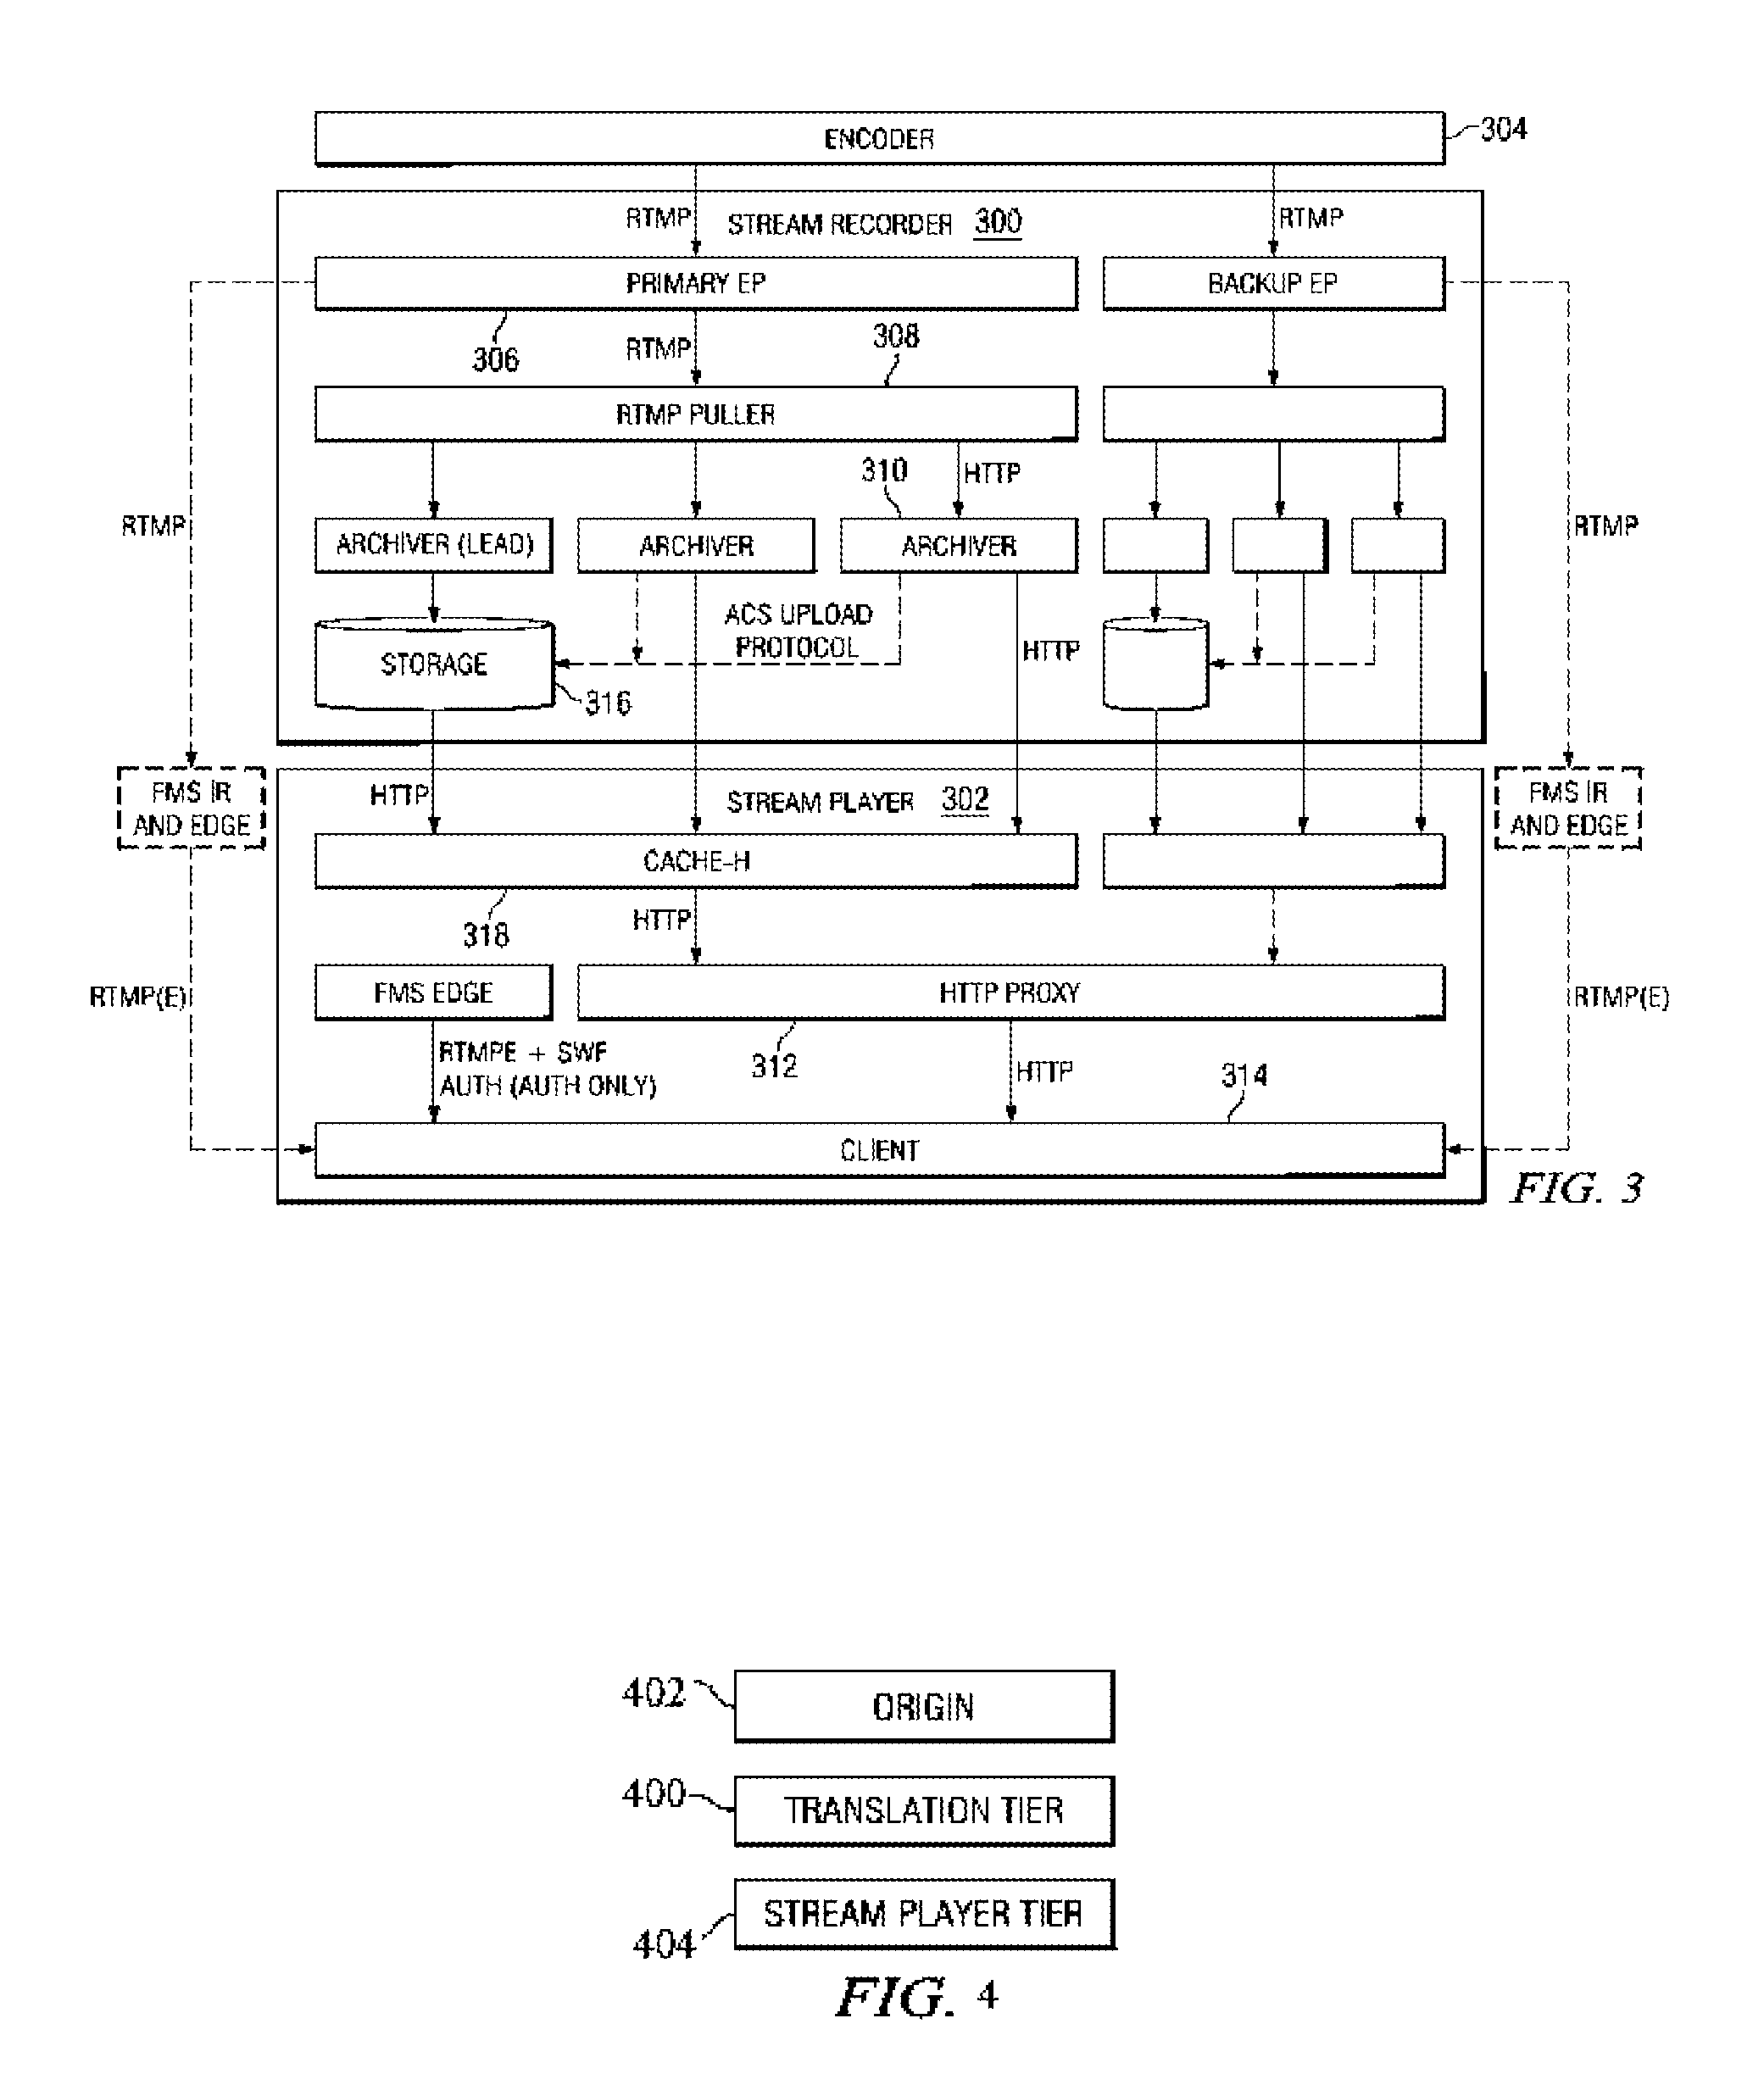 Segmented parallel encoding with frame-aware, variable-size chunking